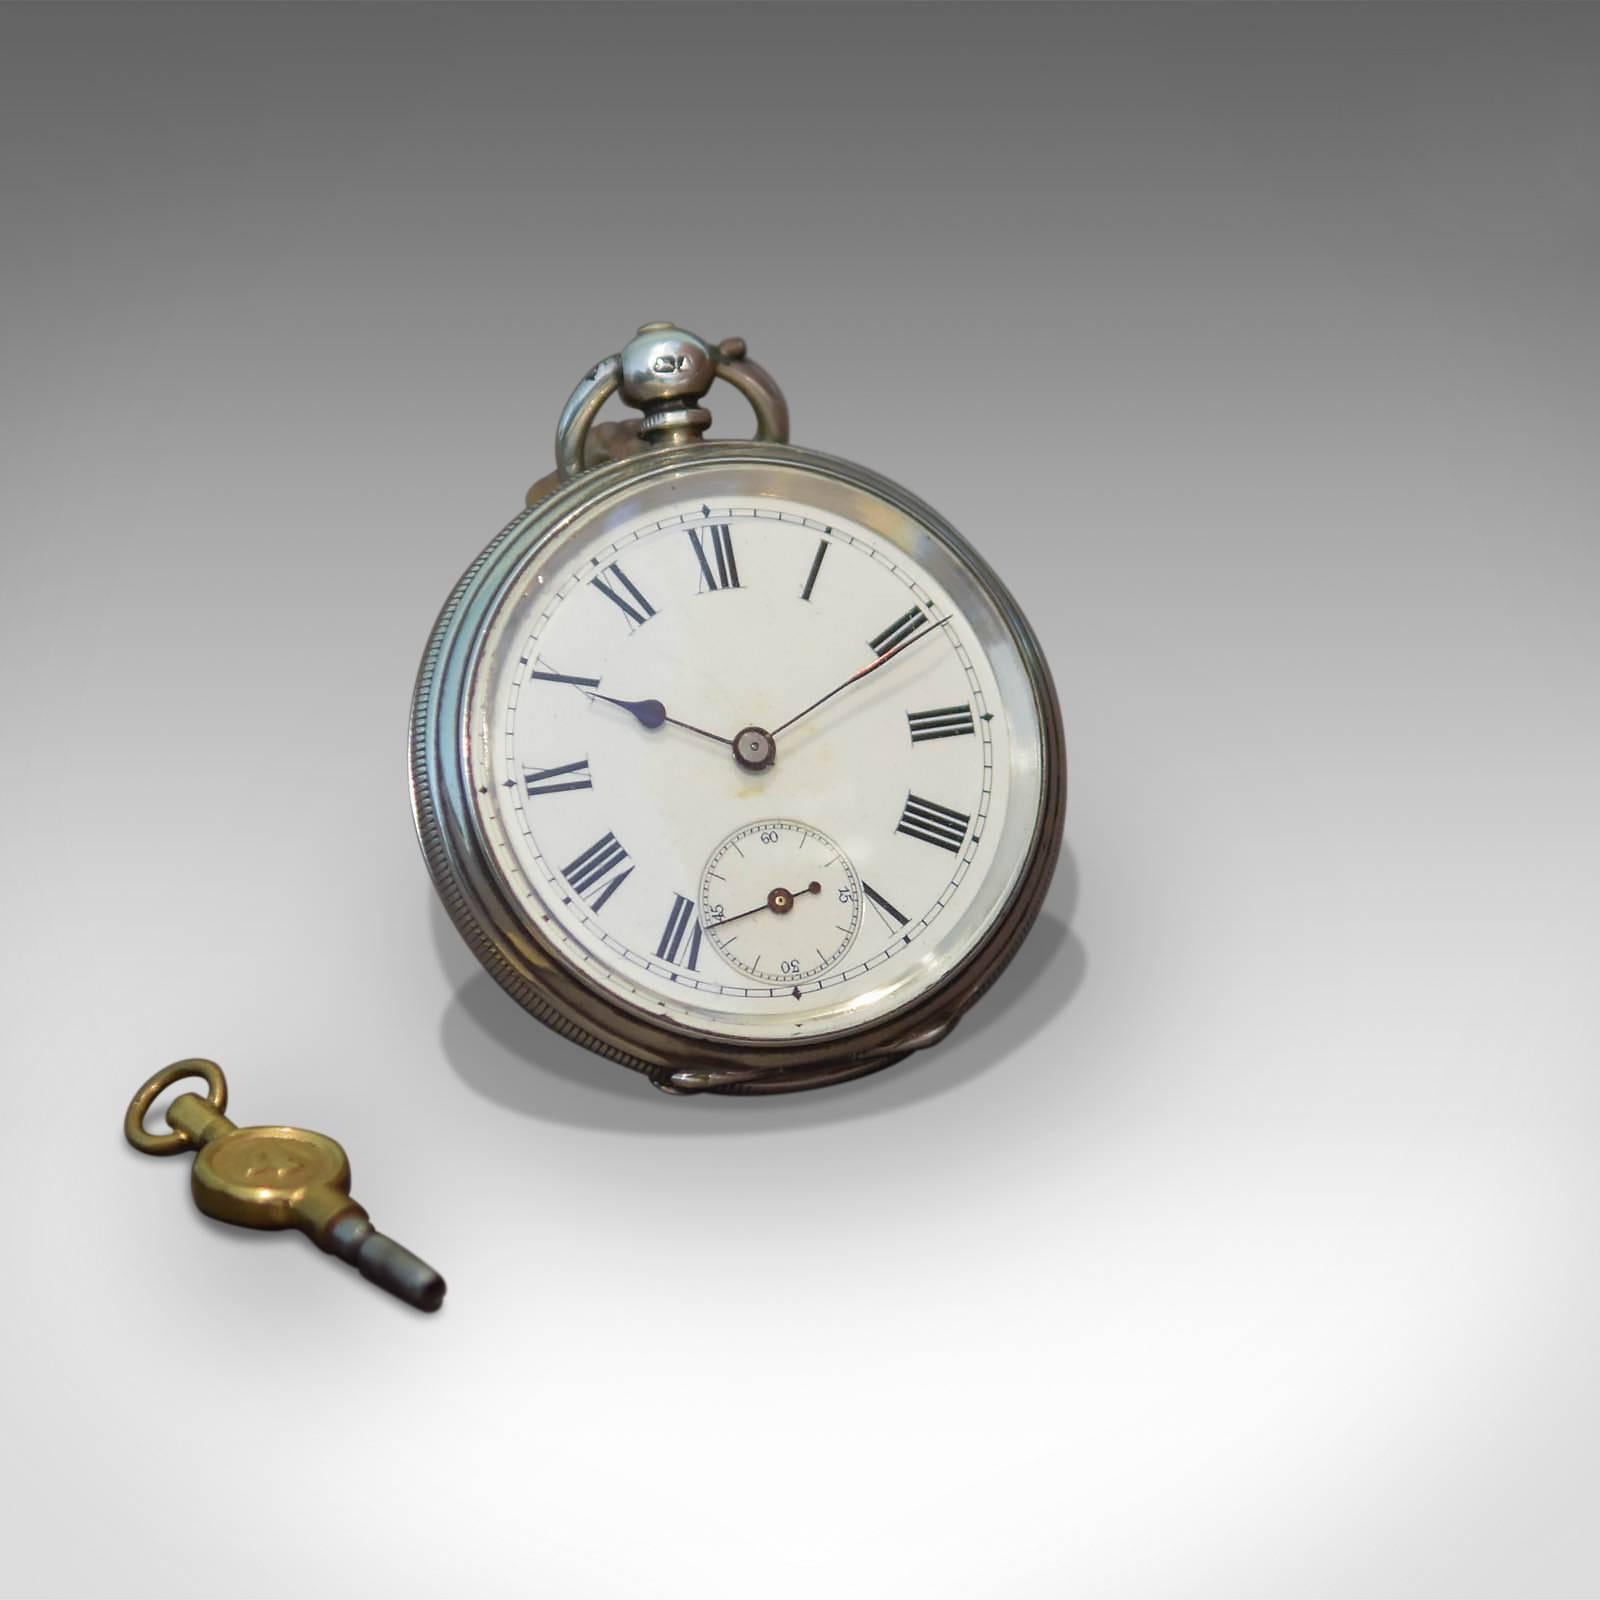 This is a good quality antique silver cased Lever pocket watch with key.

Keeping good time, this watch displays Roman numeral legend with black spade hands. A secondary seconds dial at the '6' position has Arabic legend with black hand.

The